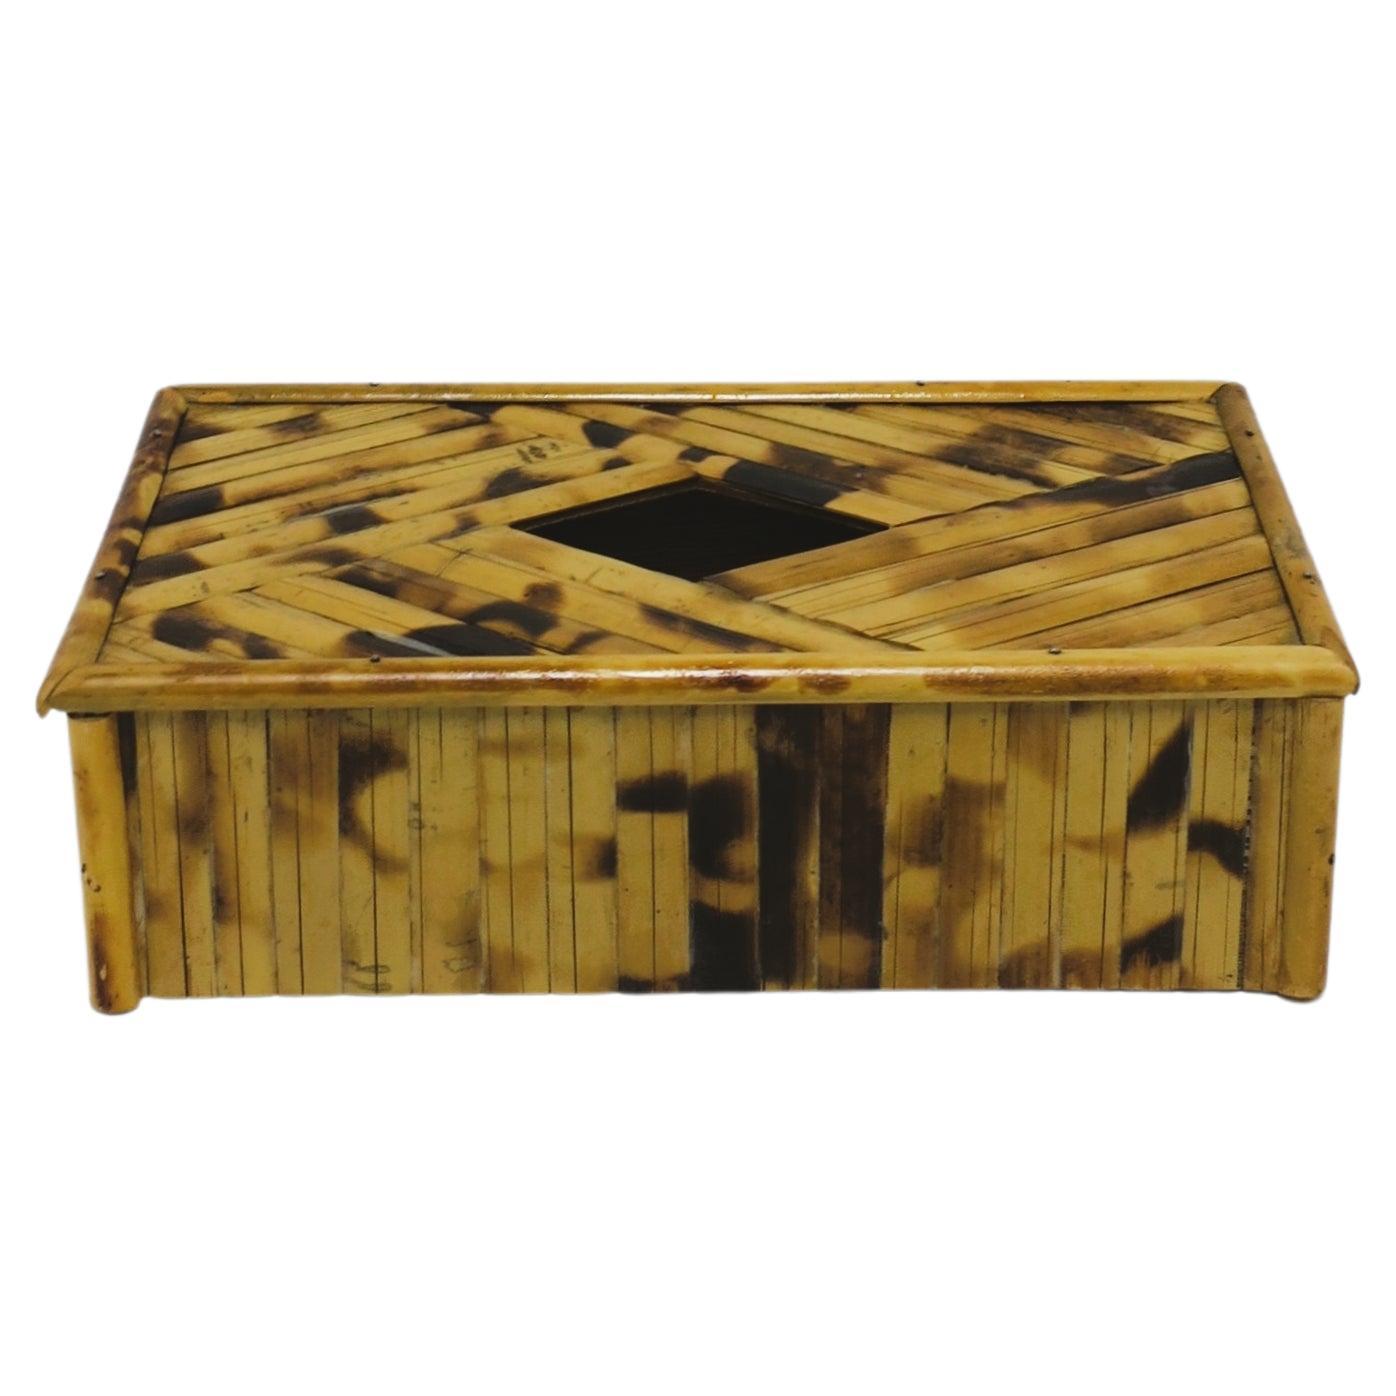 Wicker Bamboo Tissue Box Cover Holder For Sale